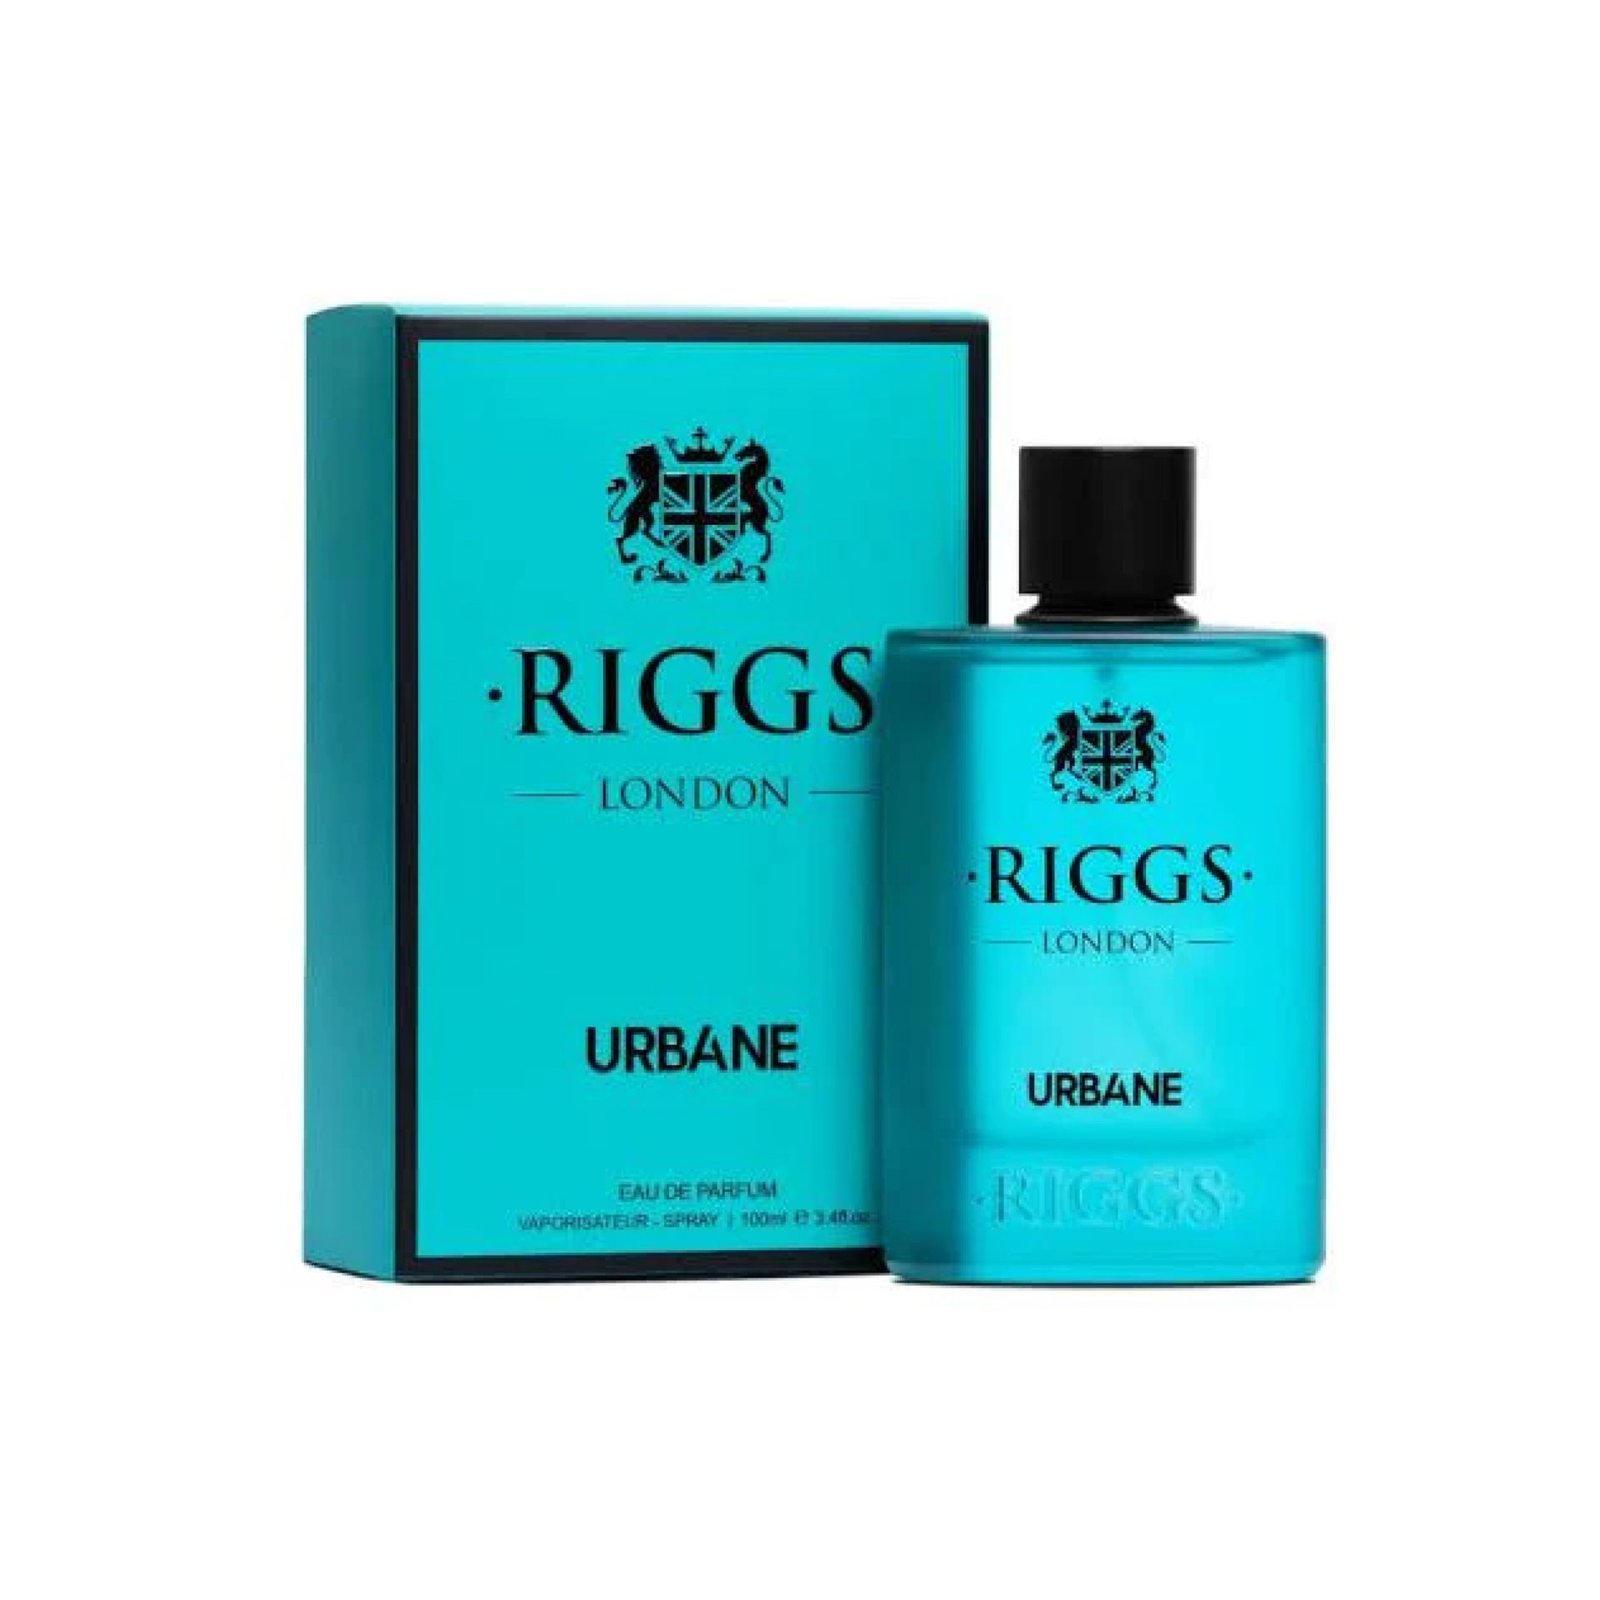 Buy Riggs London Urbane Perfume 100ml at Rs. 2400 from Likeshop.pk